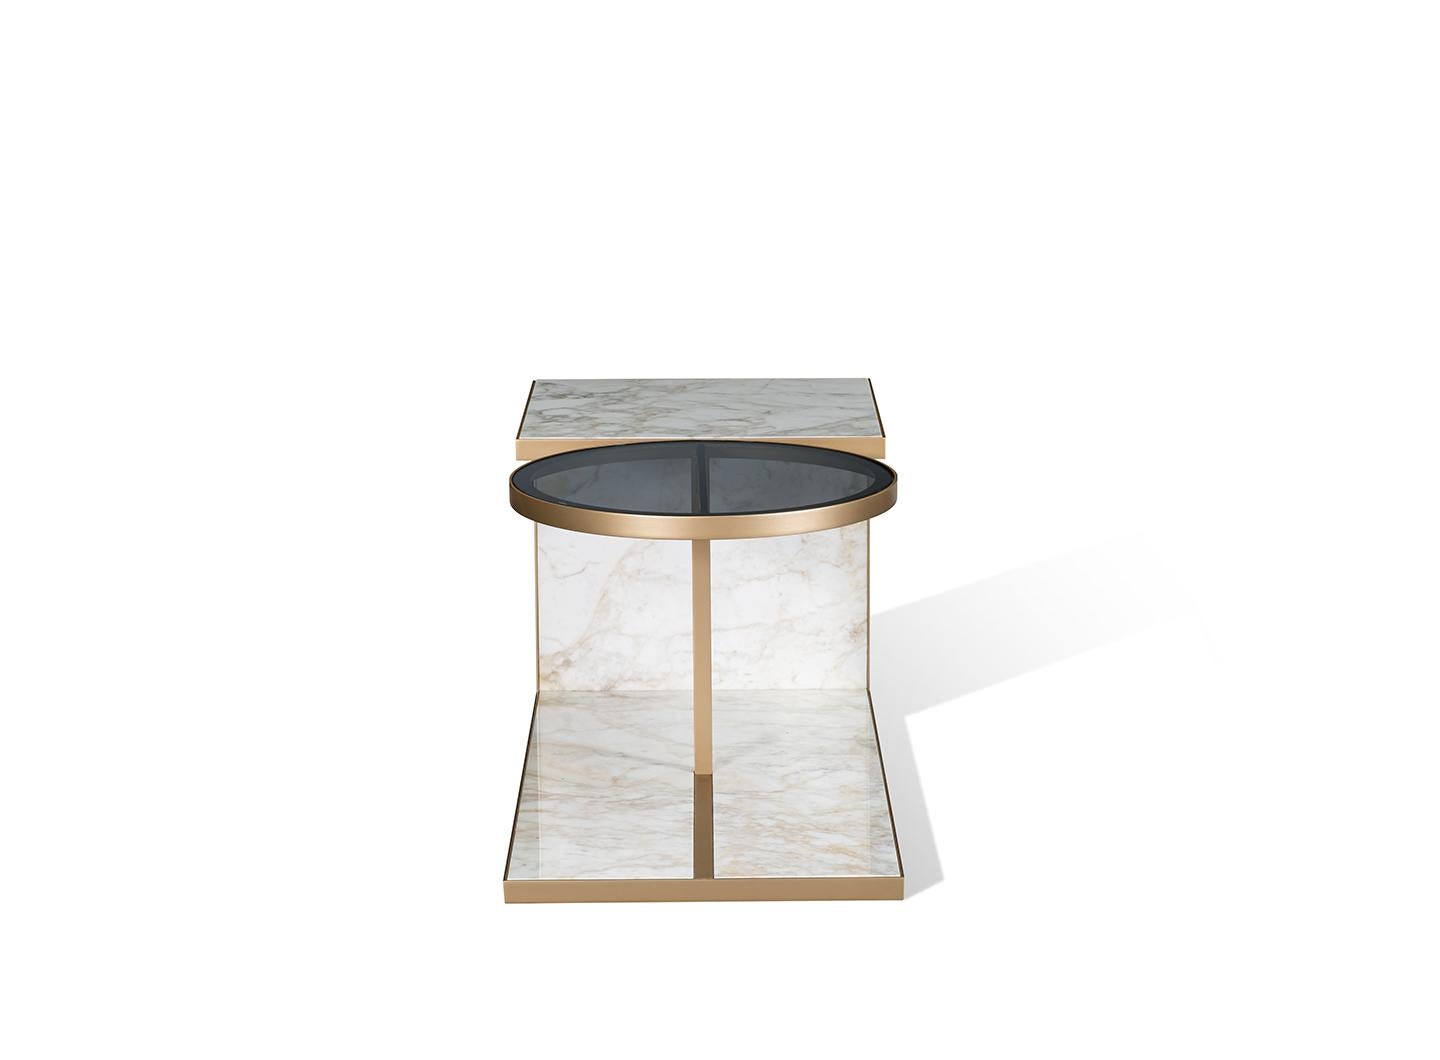 21st Century Carpanese Home Italia Coffee Table Modern, Alfred M In New Condition For Sale In Sanguinetto, IT